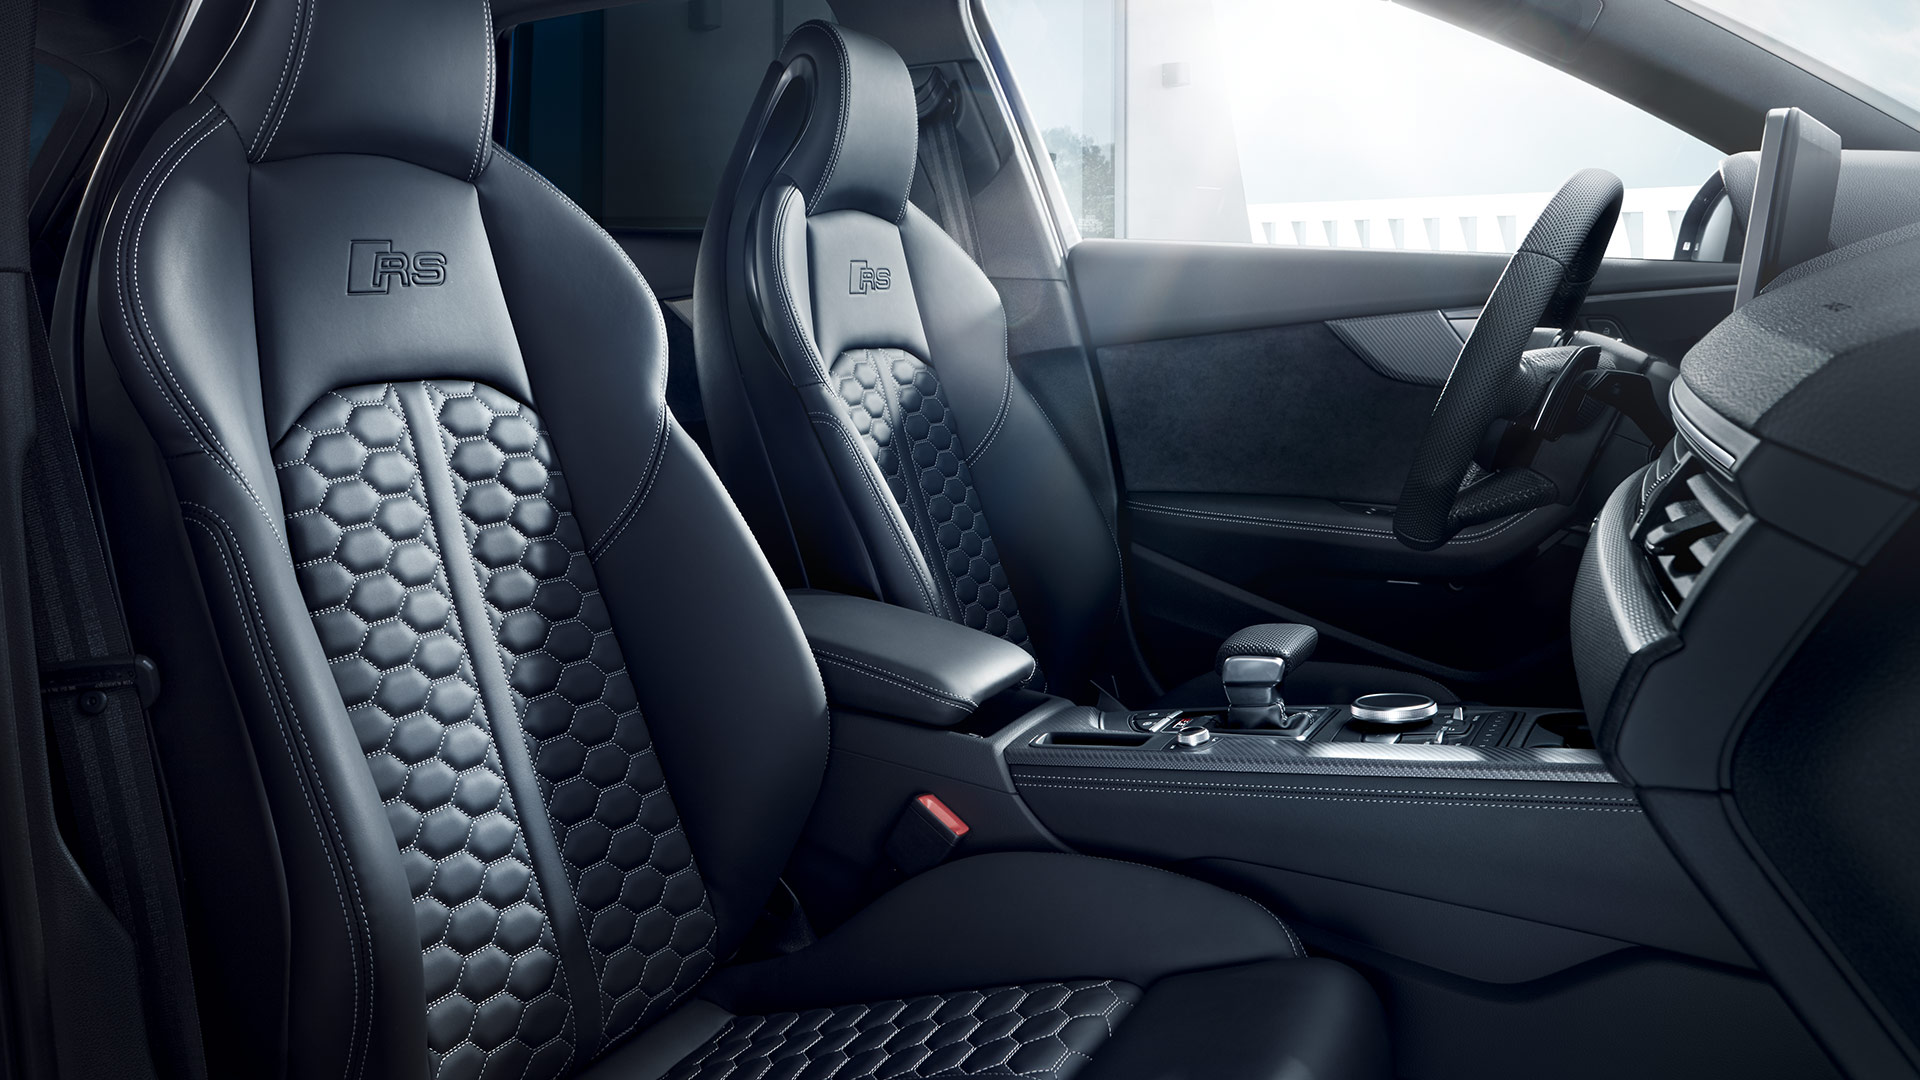 The interior of the Audi RS 4 Avant is sporty and practical.